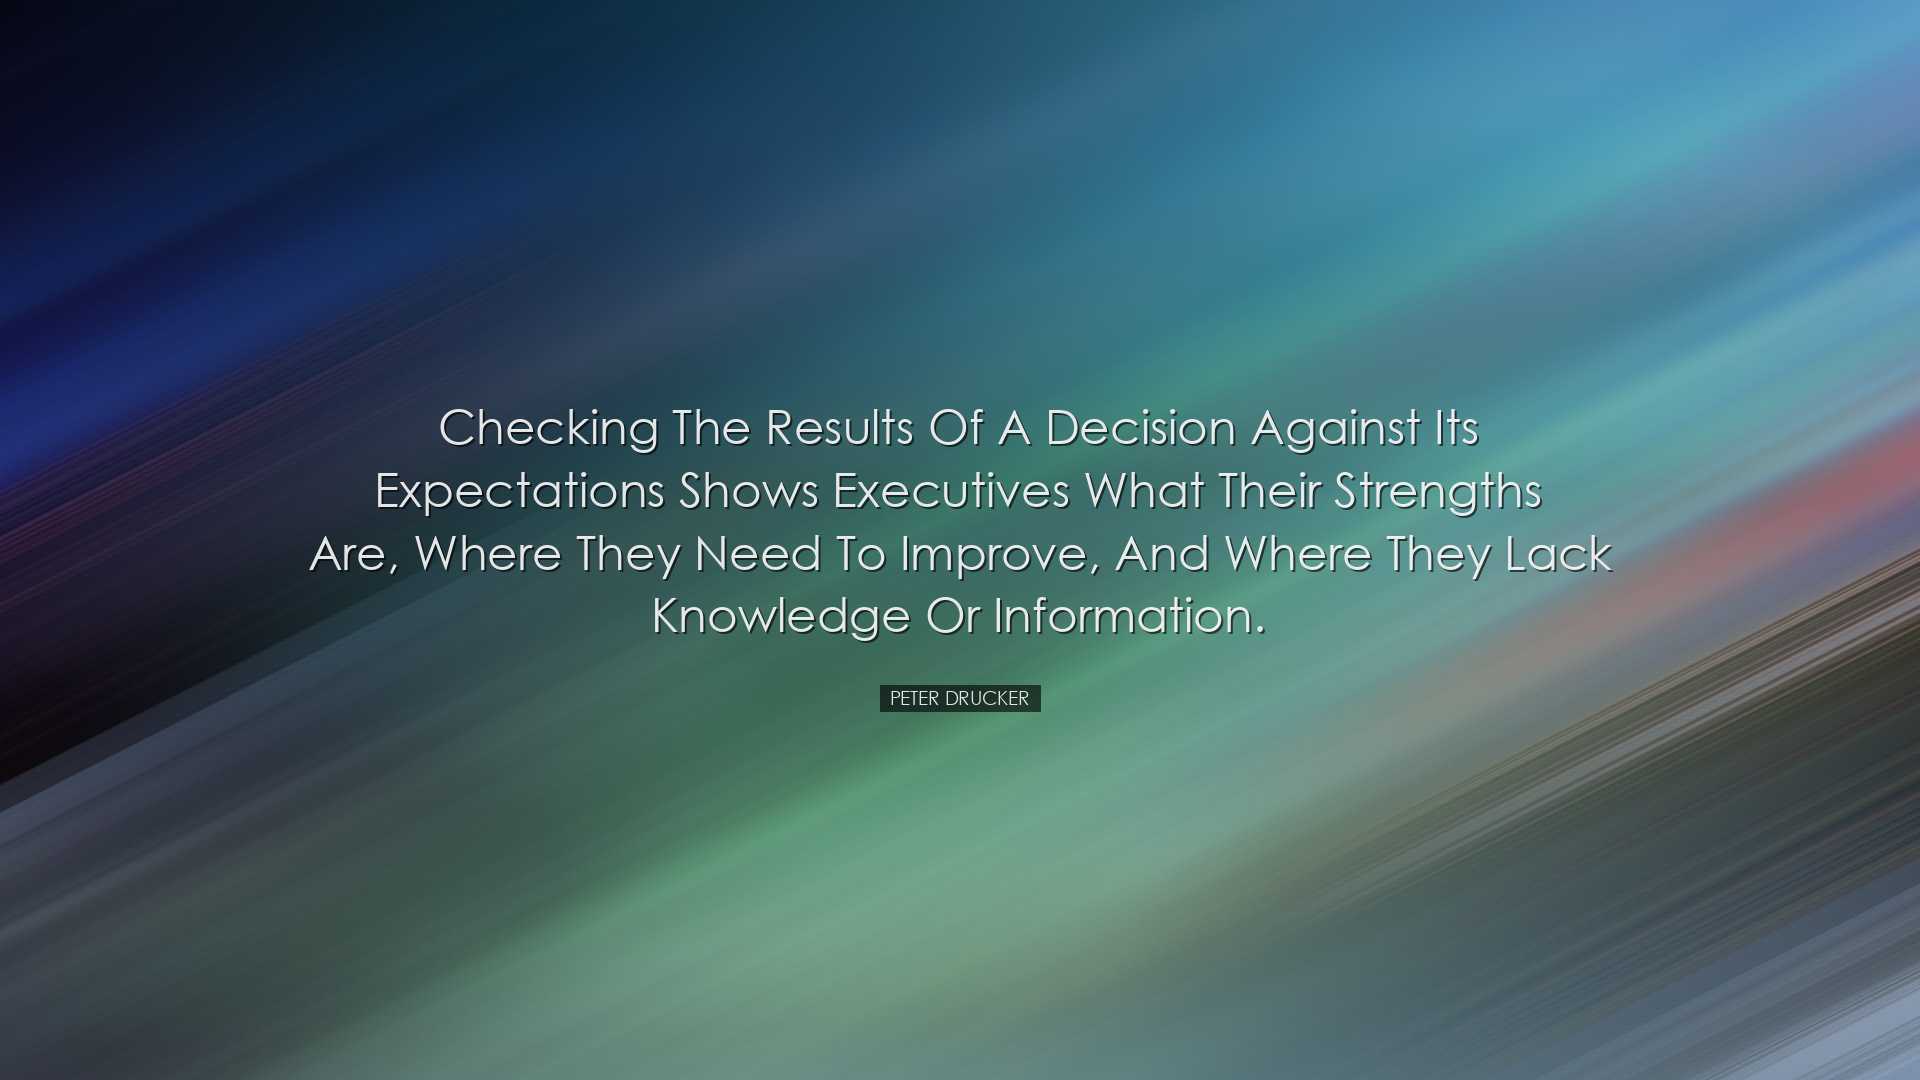 Checking the results of a decision against its expectations shows